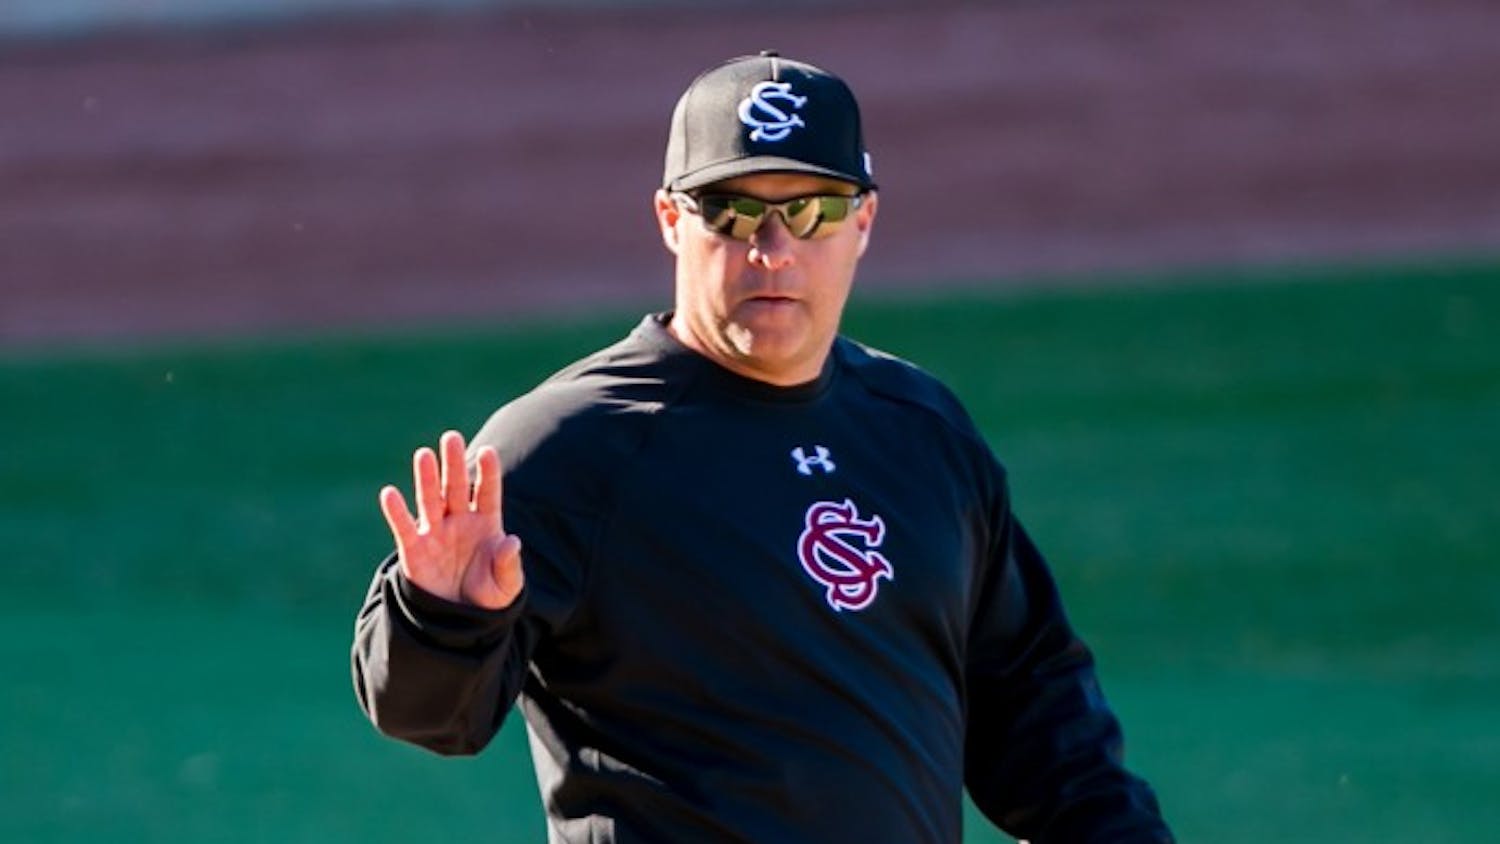 South Carolina head coach Chad Holbrook waves to fans following a 7-1 win against the College of Charleston at Carolina Stadium in Columbia, S.C., on Saturday, Feb. 14, 205. (Jeff Blake/The State/TNS)